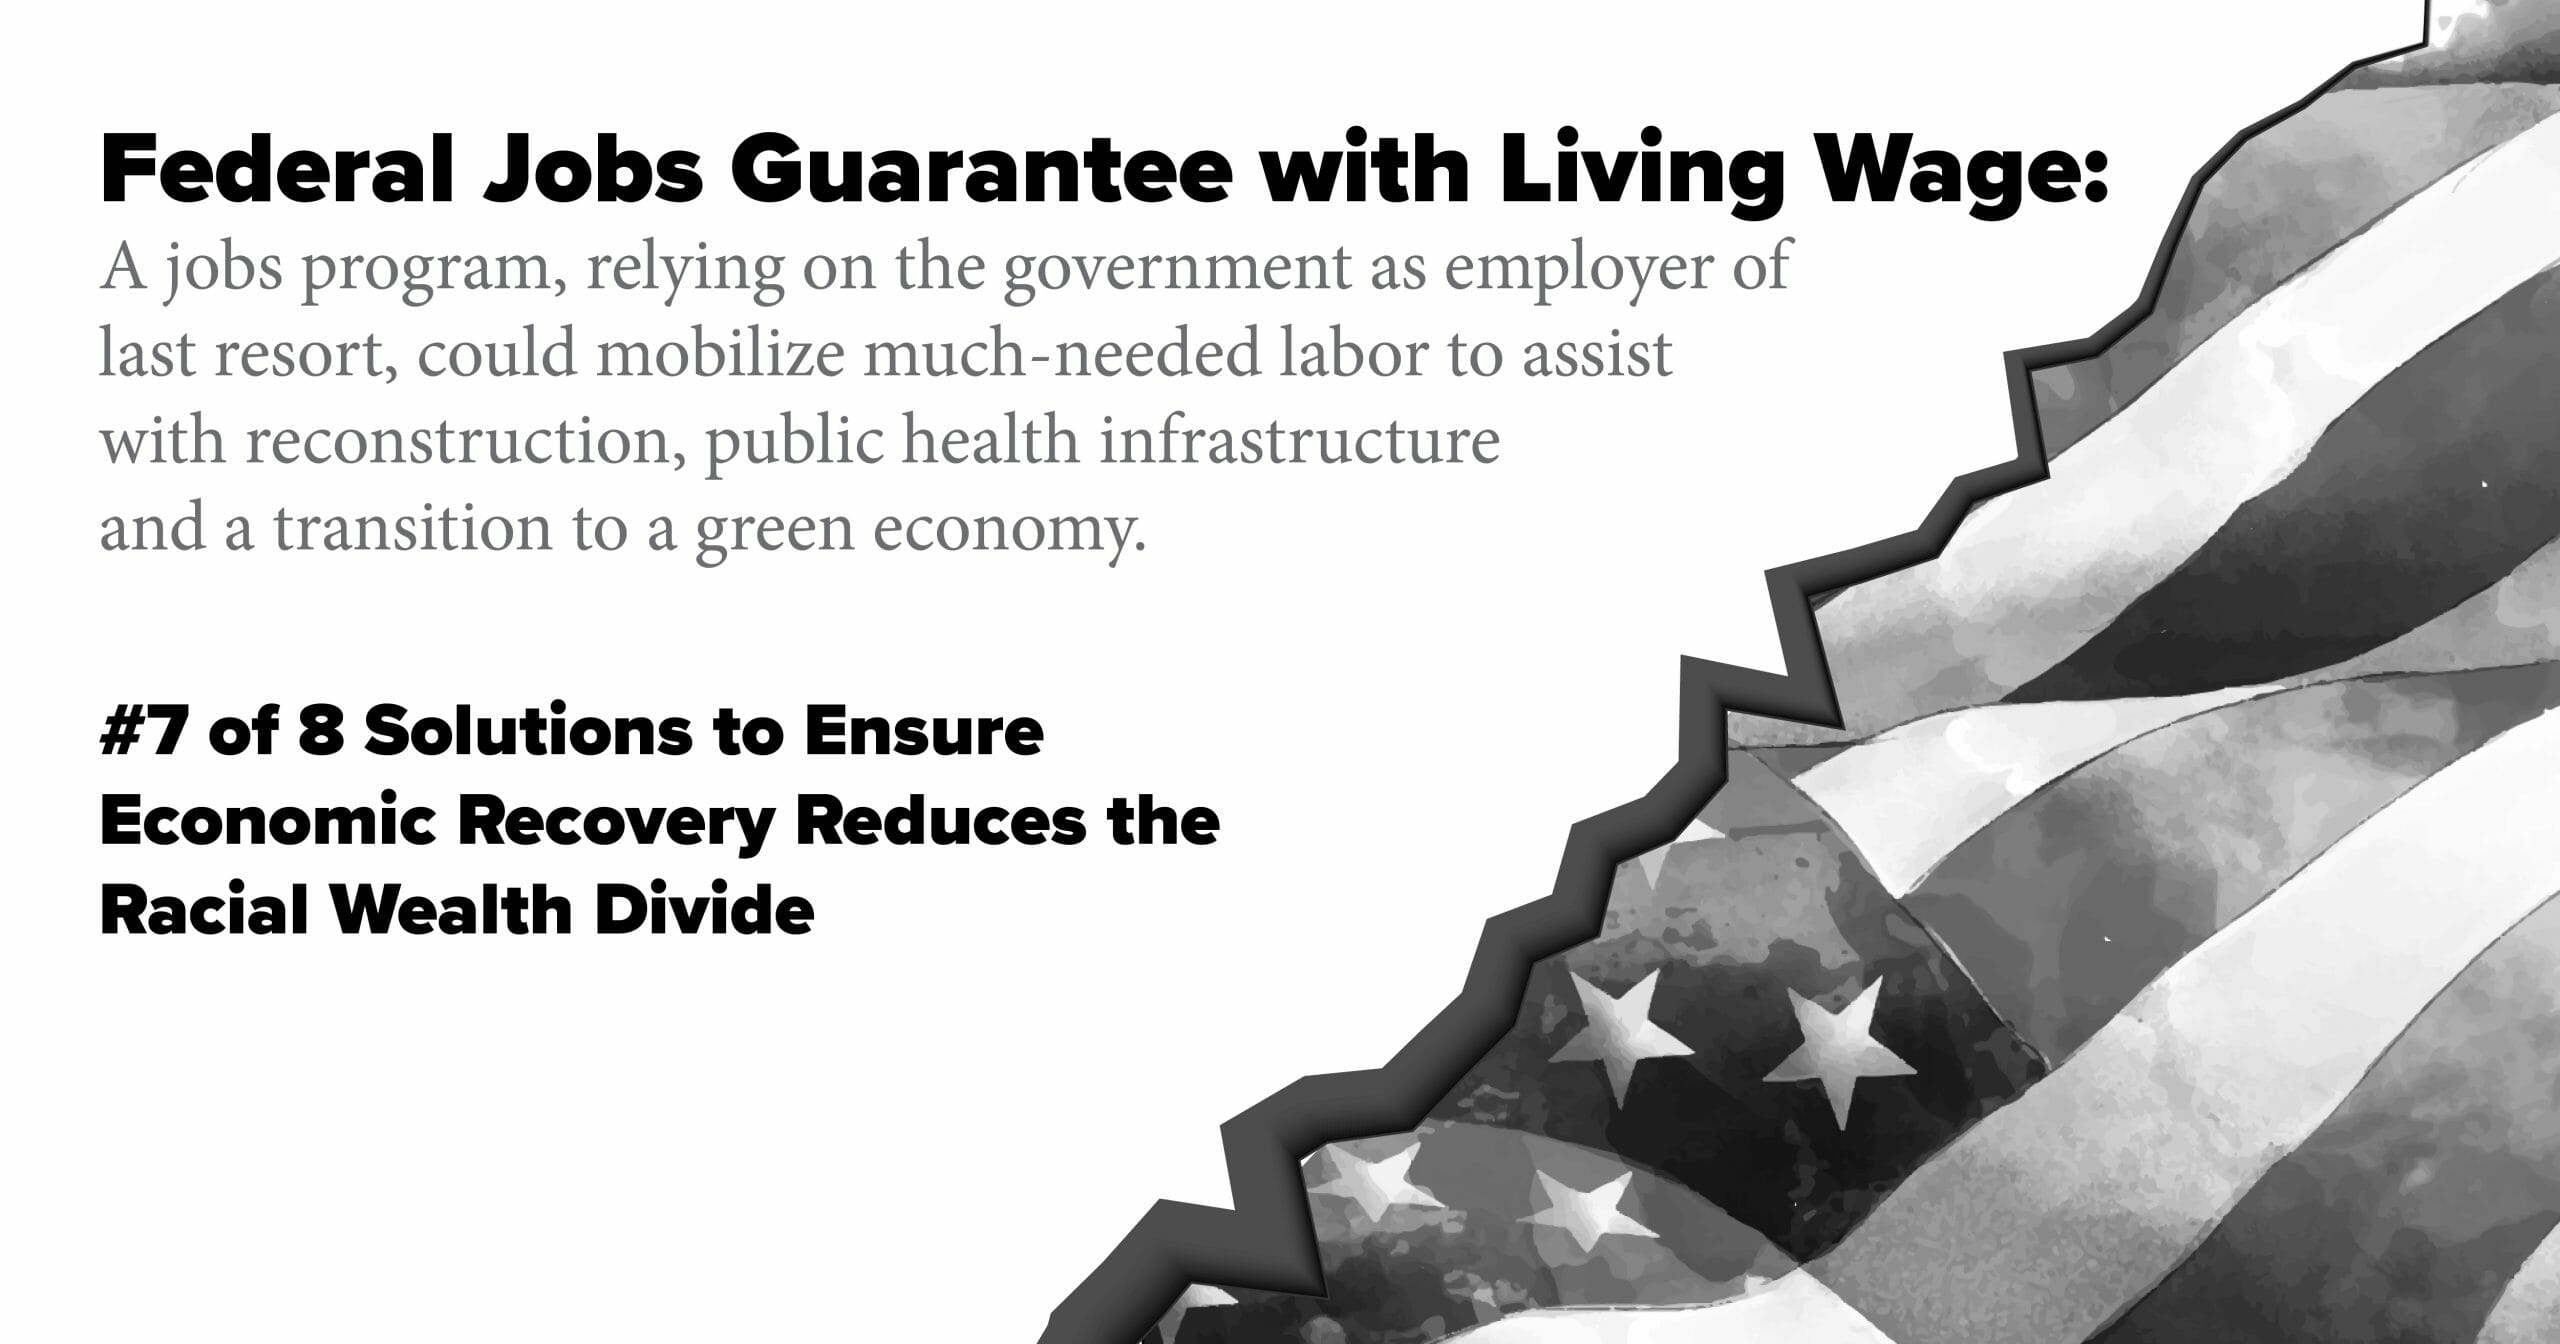 Federal Jobs Guarantee with Living Wage. A jobs program, relying on the government as employer of last resort, could mobilize much-needed labor to assist with reconstruction, public health infrastructure and a transition to a green economy.